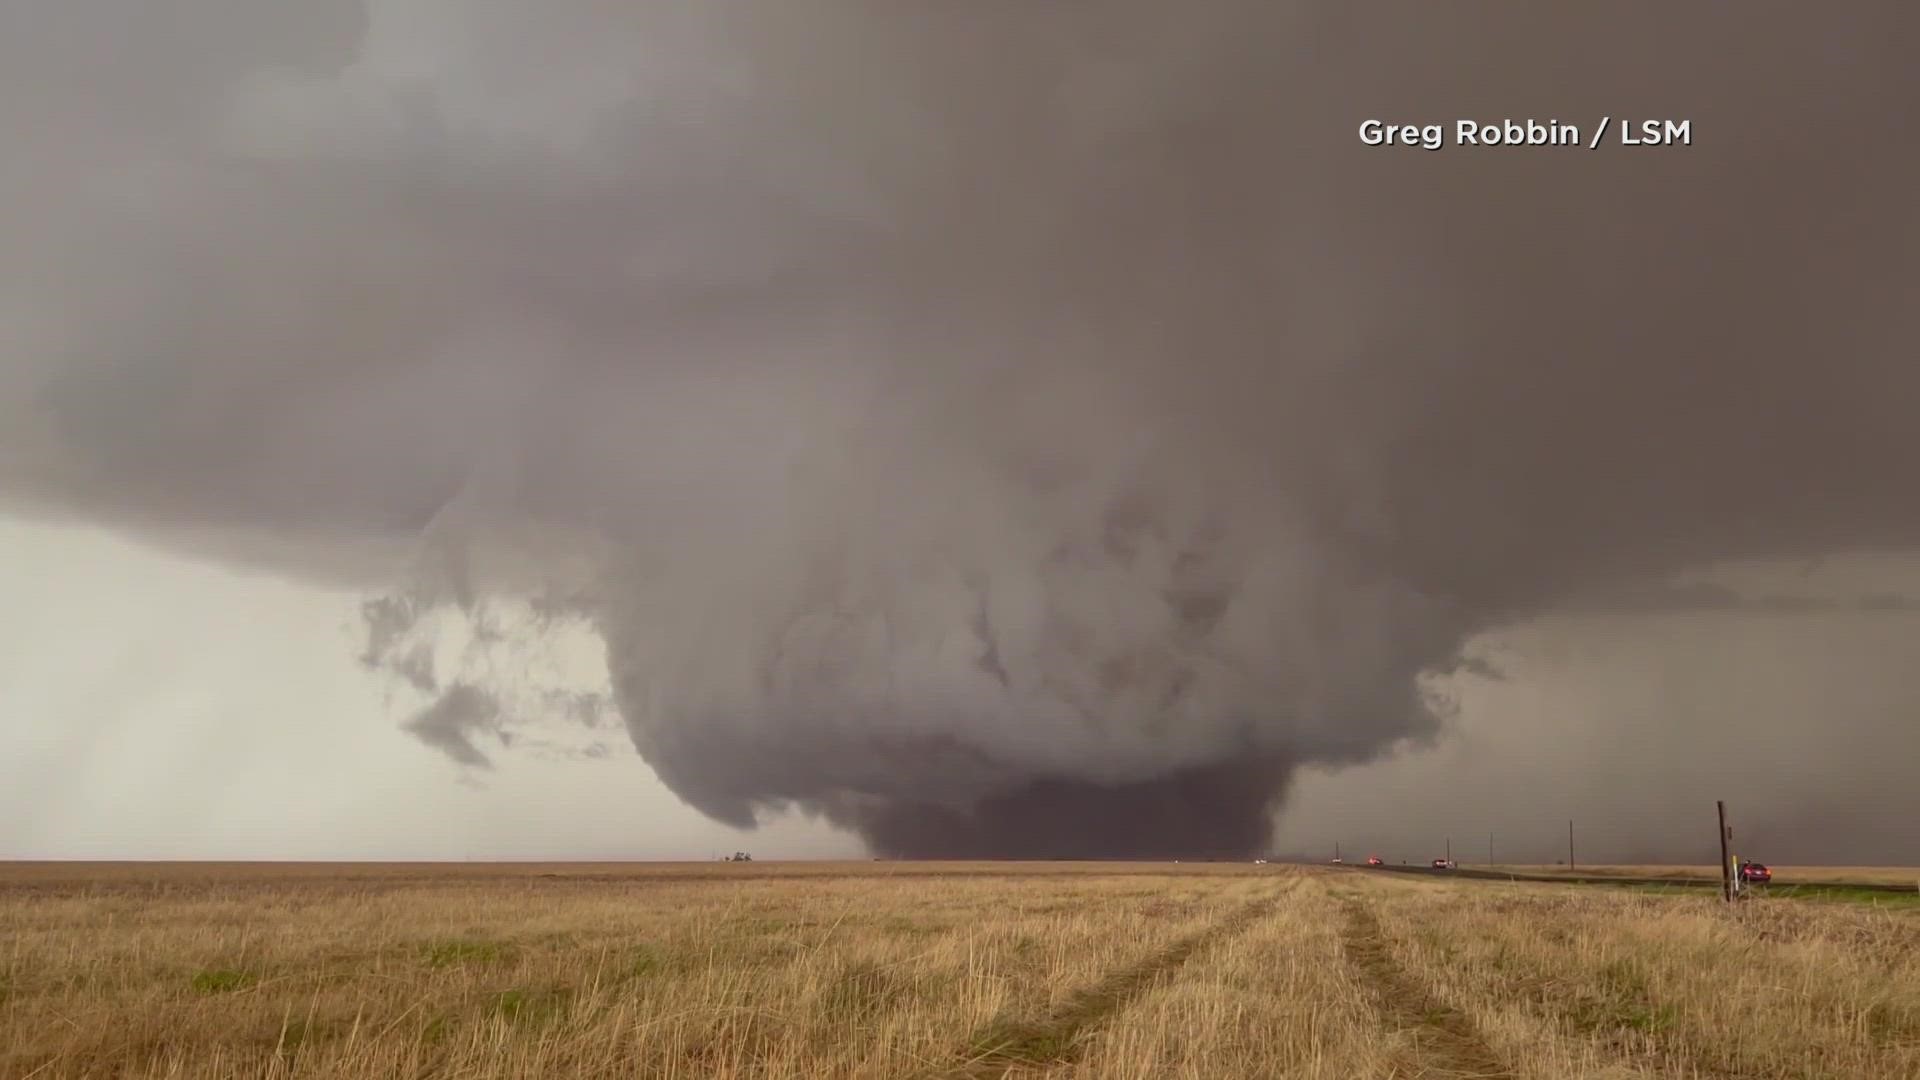 Storms produce large tornado west of Lubbock, Texas